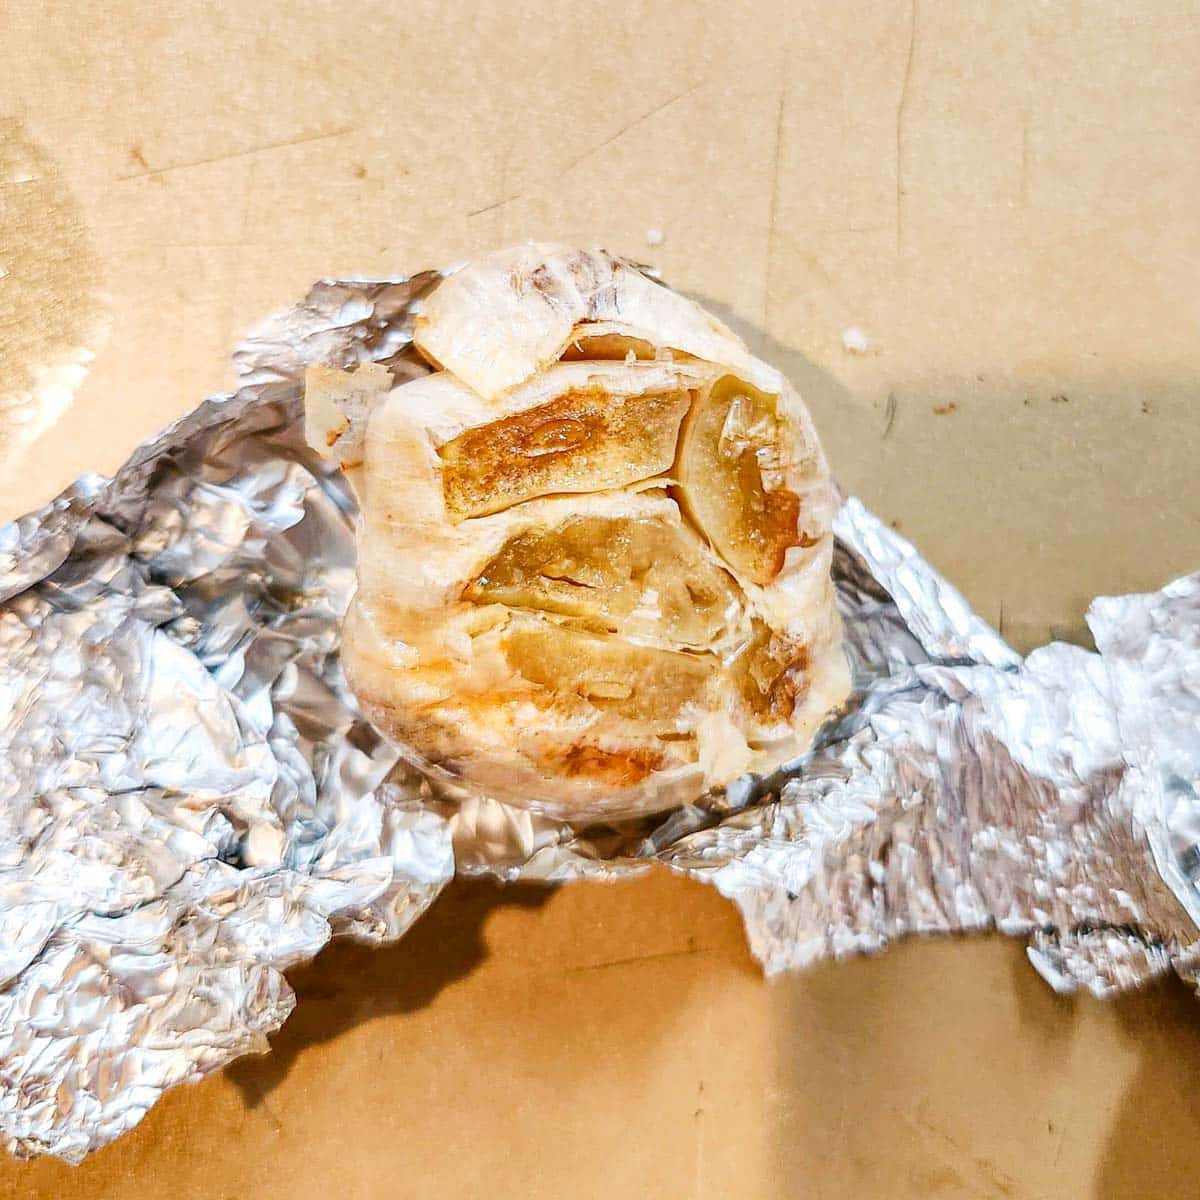 roasted garlic being pulled from some foil